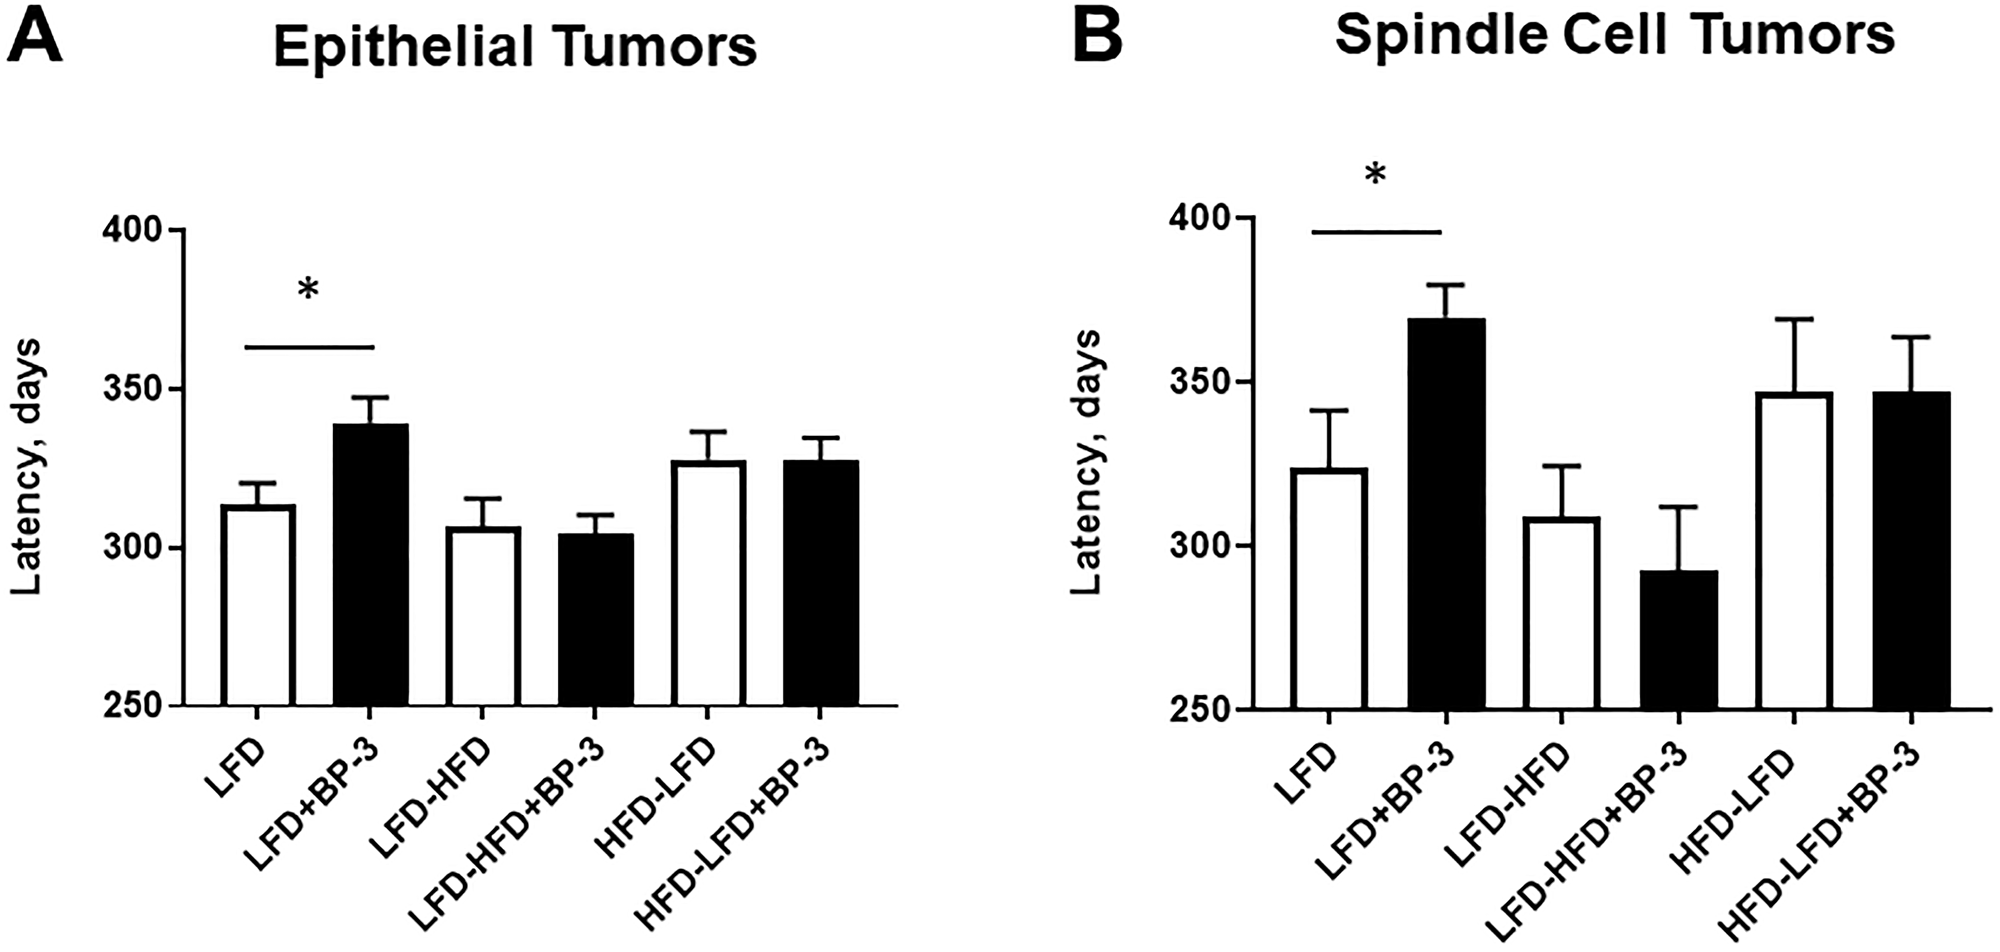 BP-3 treatment increased latency of both epithelial and spindle cell tumors in mice fed LFD.